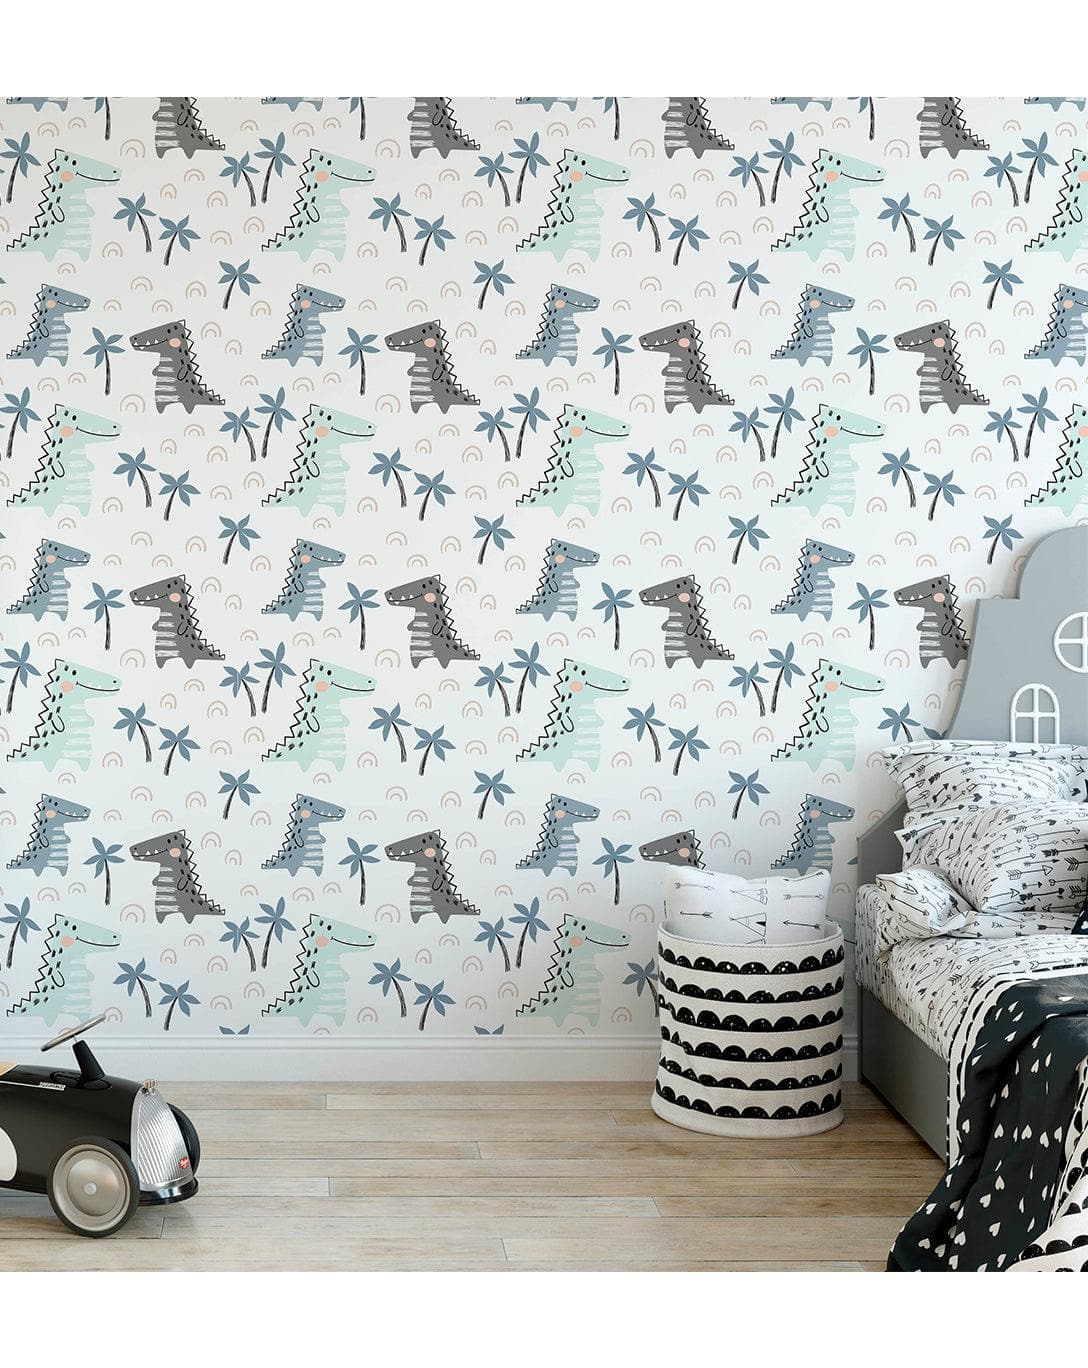 Cute Green Dinosaurs Doodle Removable Kids Wallpaper 